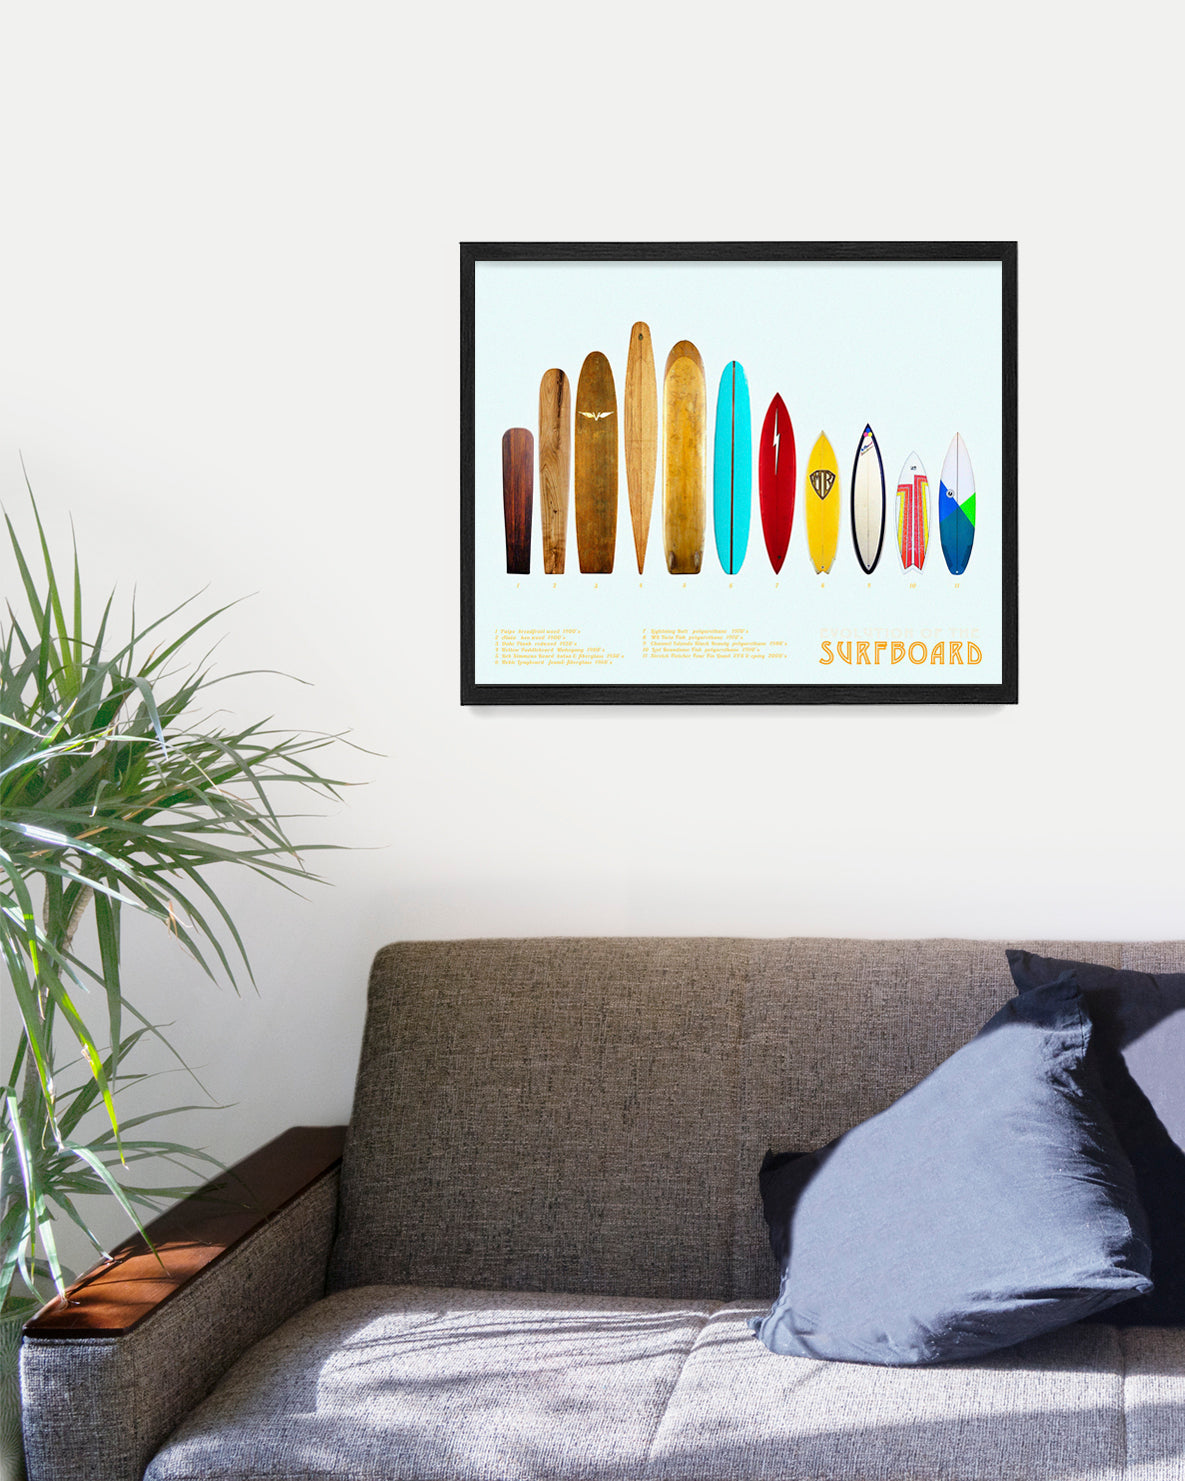 Surfboard Poster, Evolution of the Surfboard, Surfing Wall Art